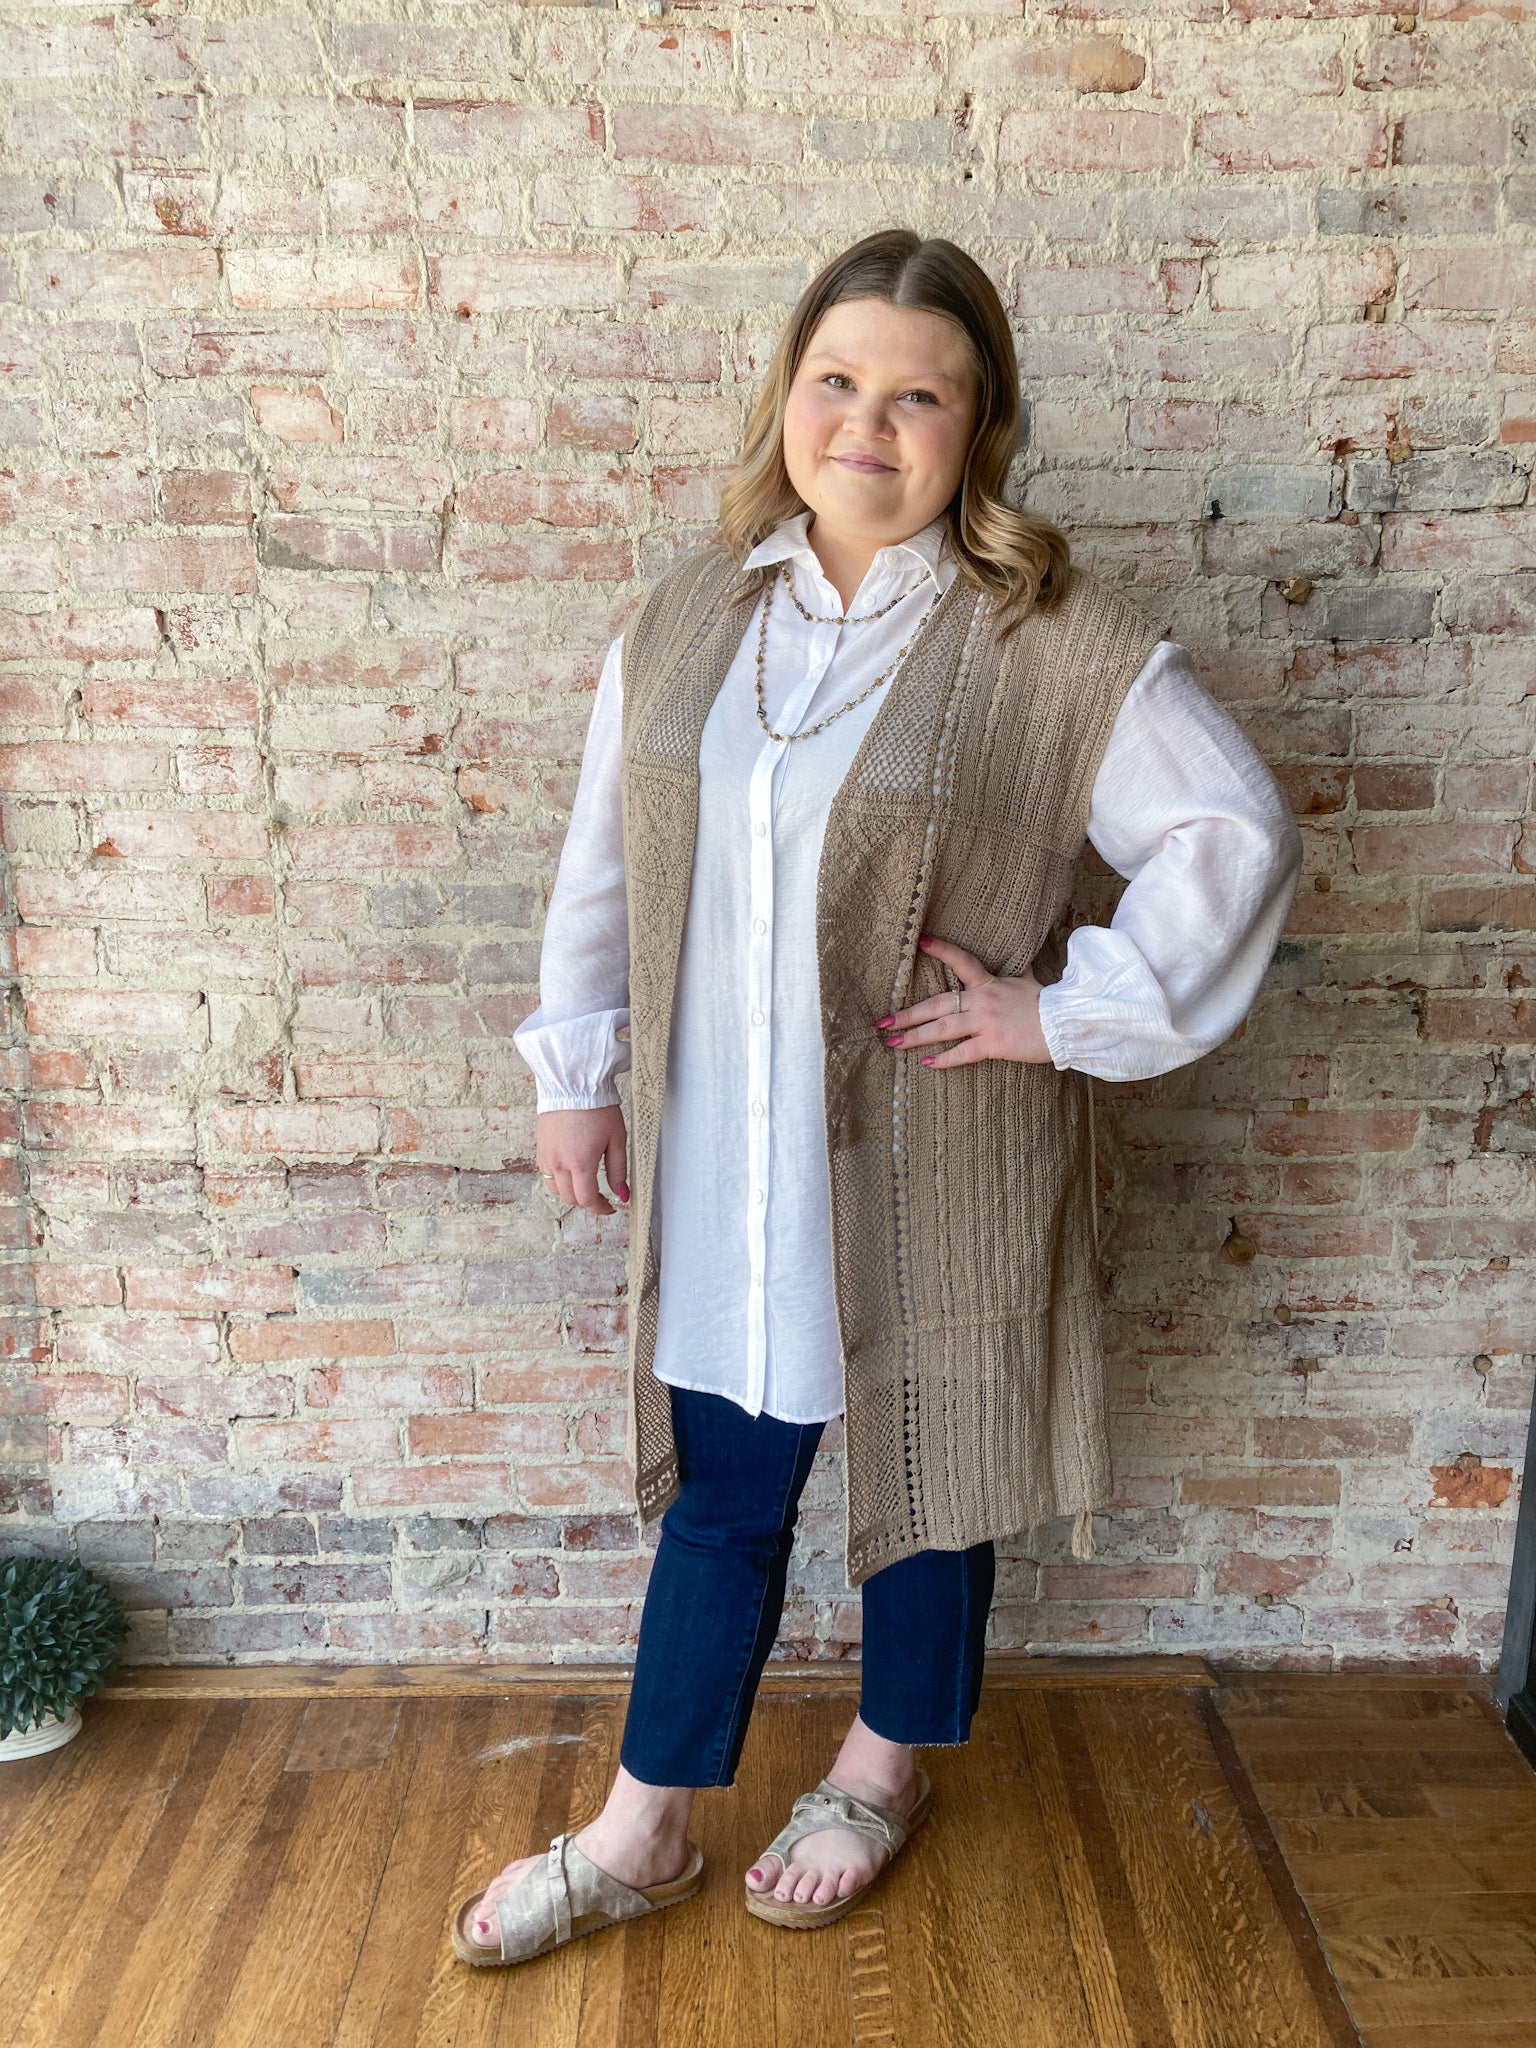 A gorgeous plus size woman wearing a classic oversized extra long white blouse with a tan crochet vest and dark wash jeans. She is also wearing a necklace and some fun sandals.